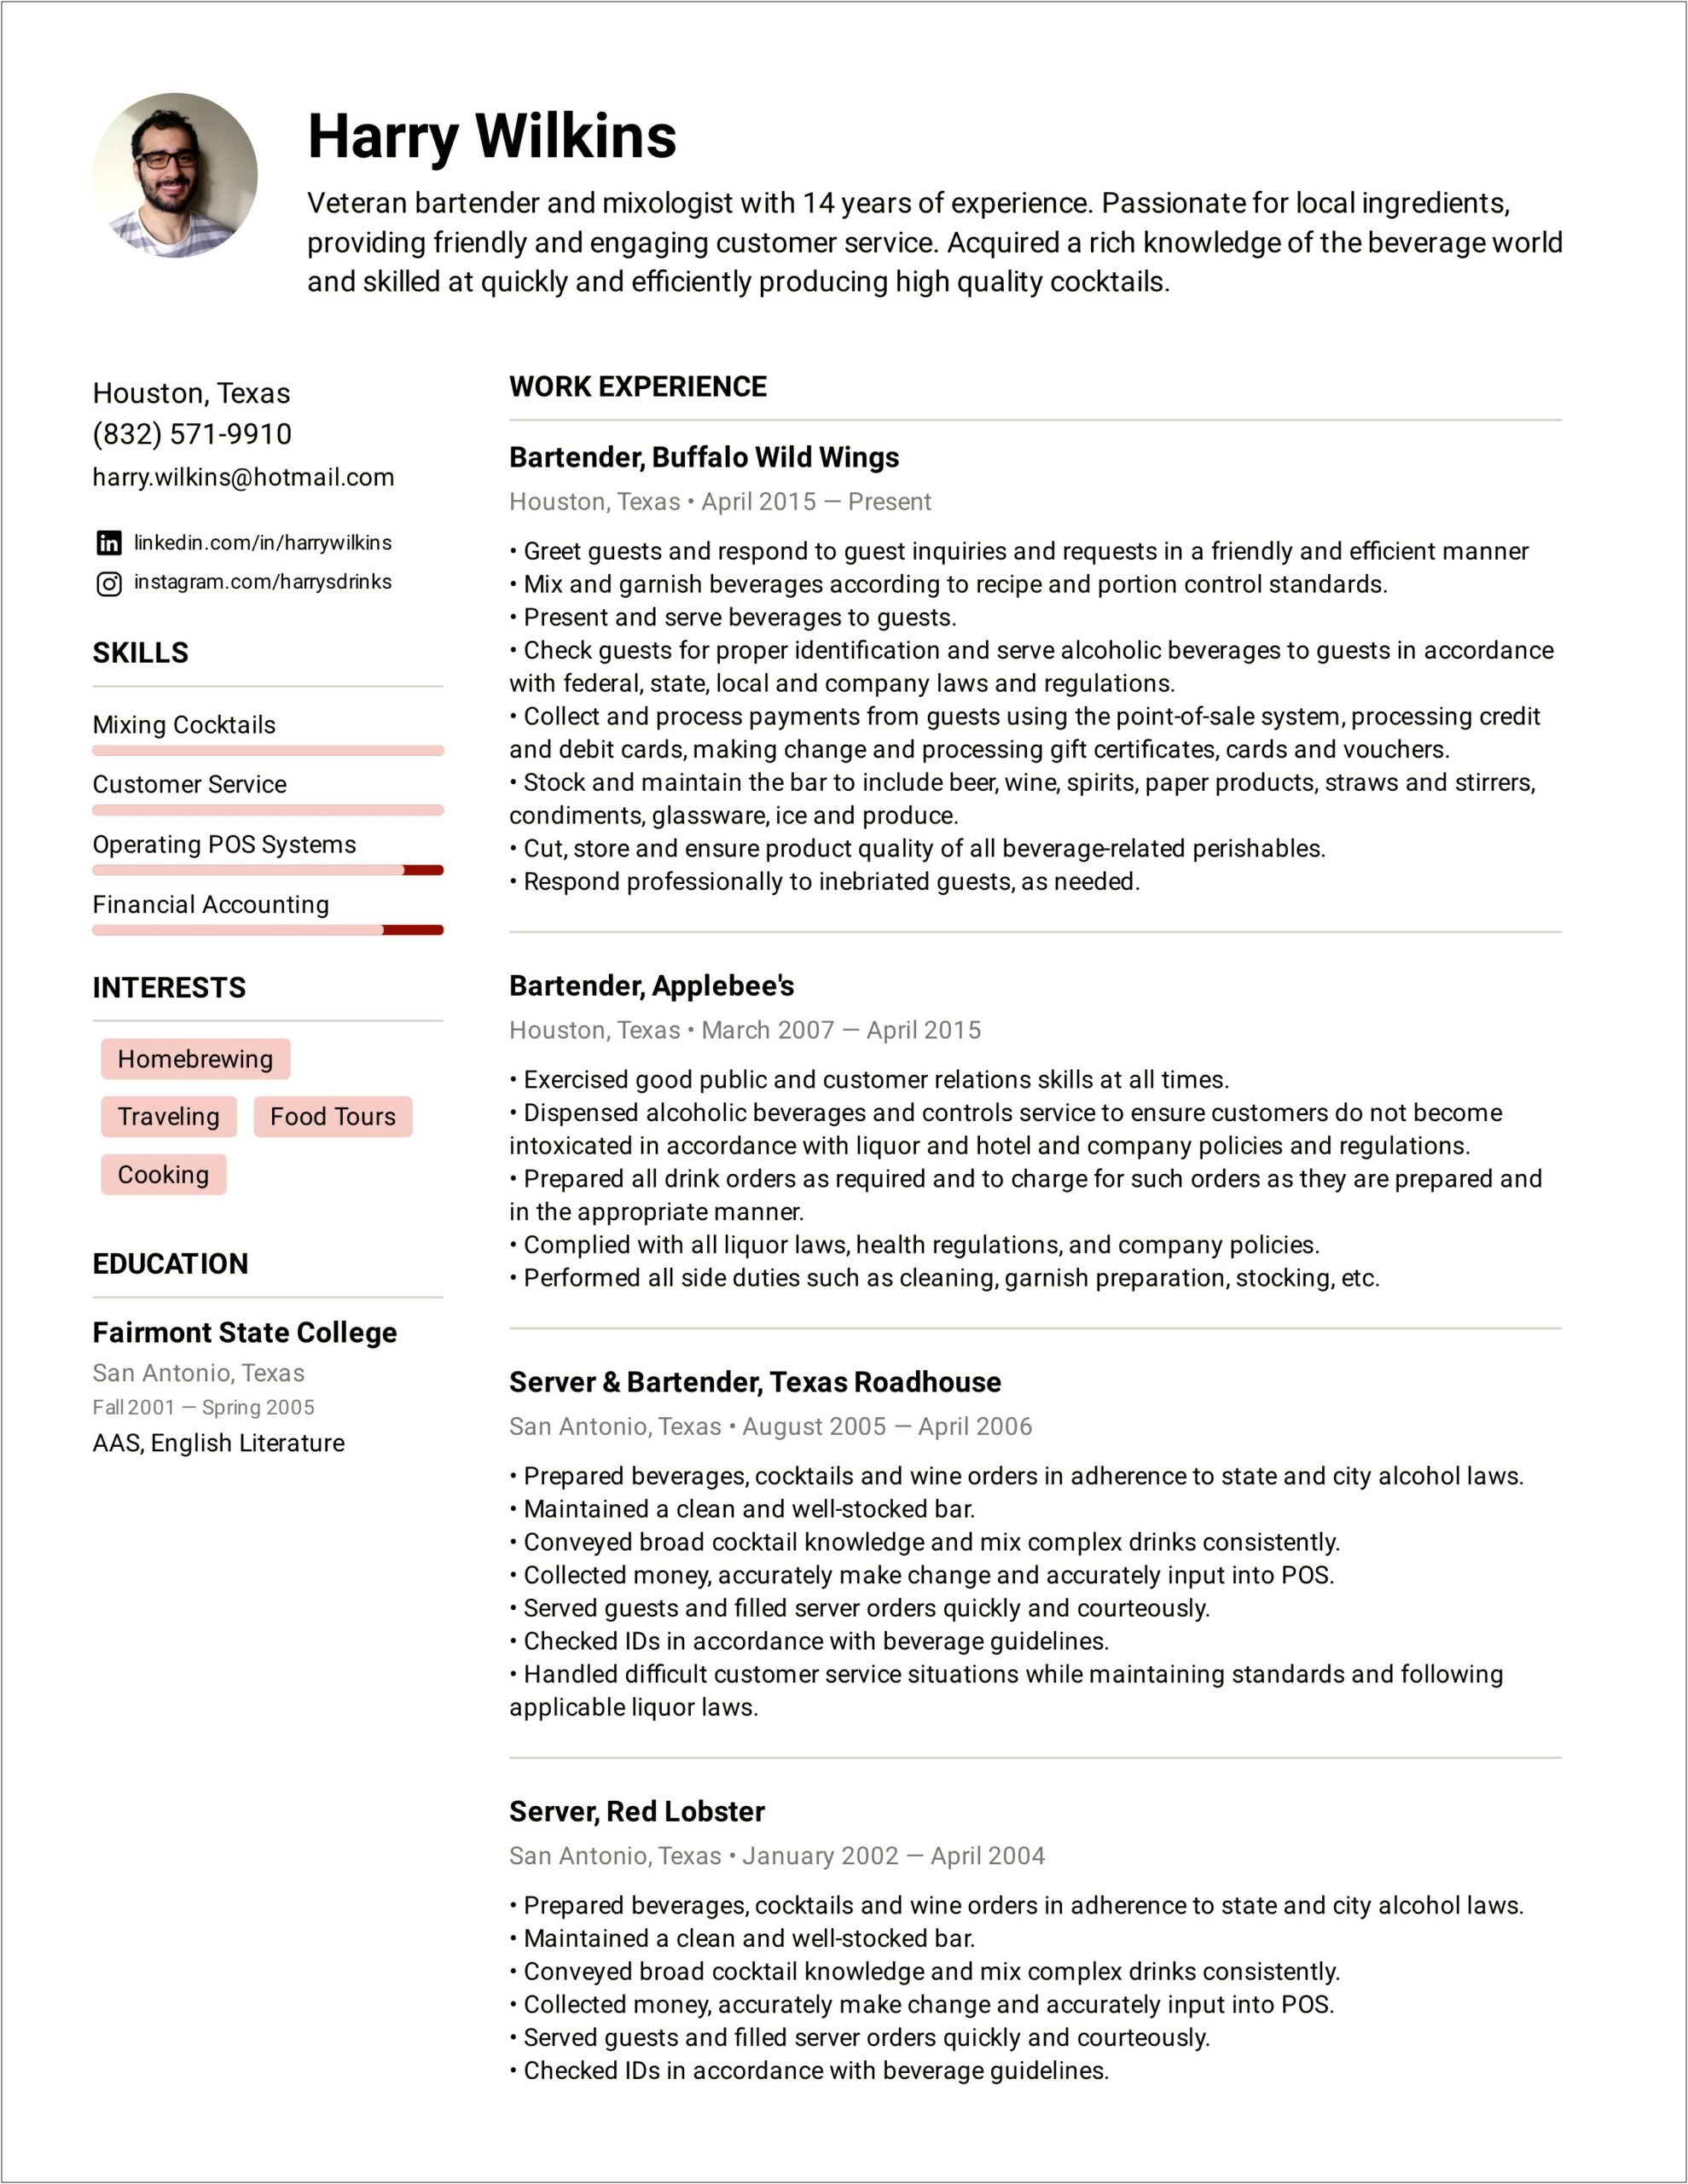 A Good Professional Summary For Resume